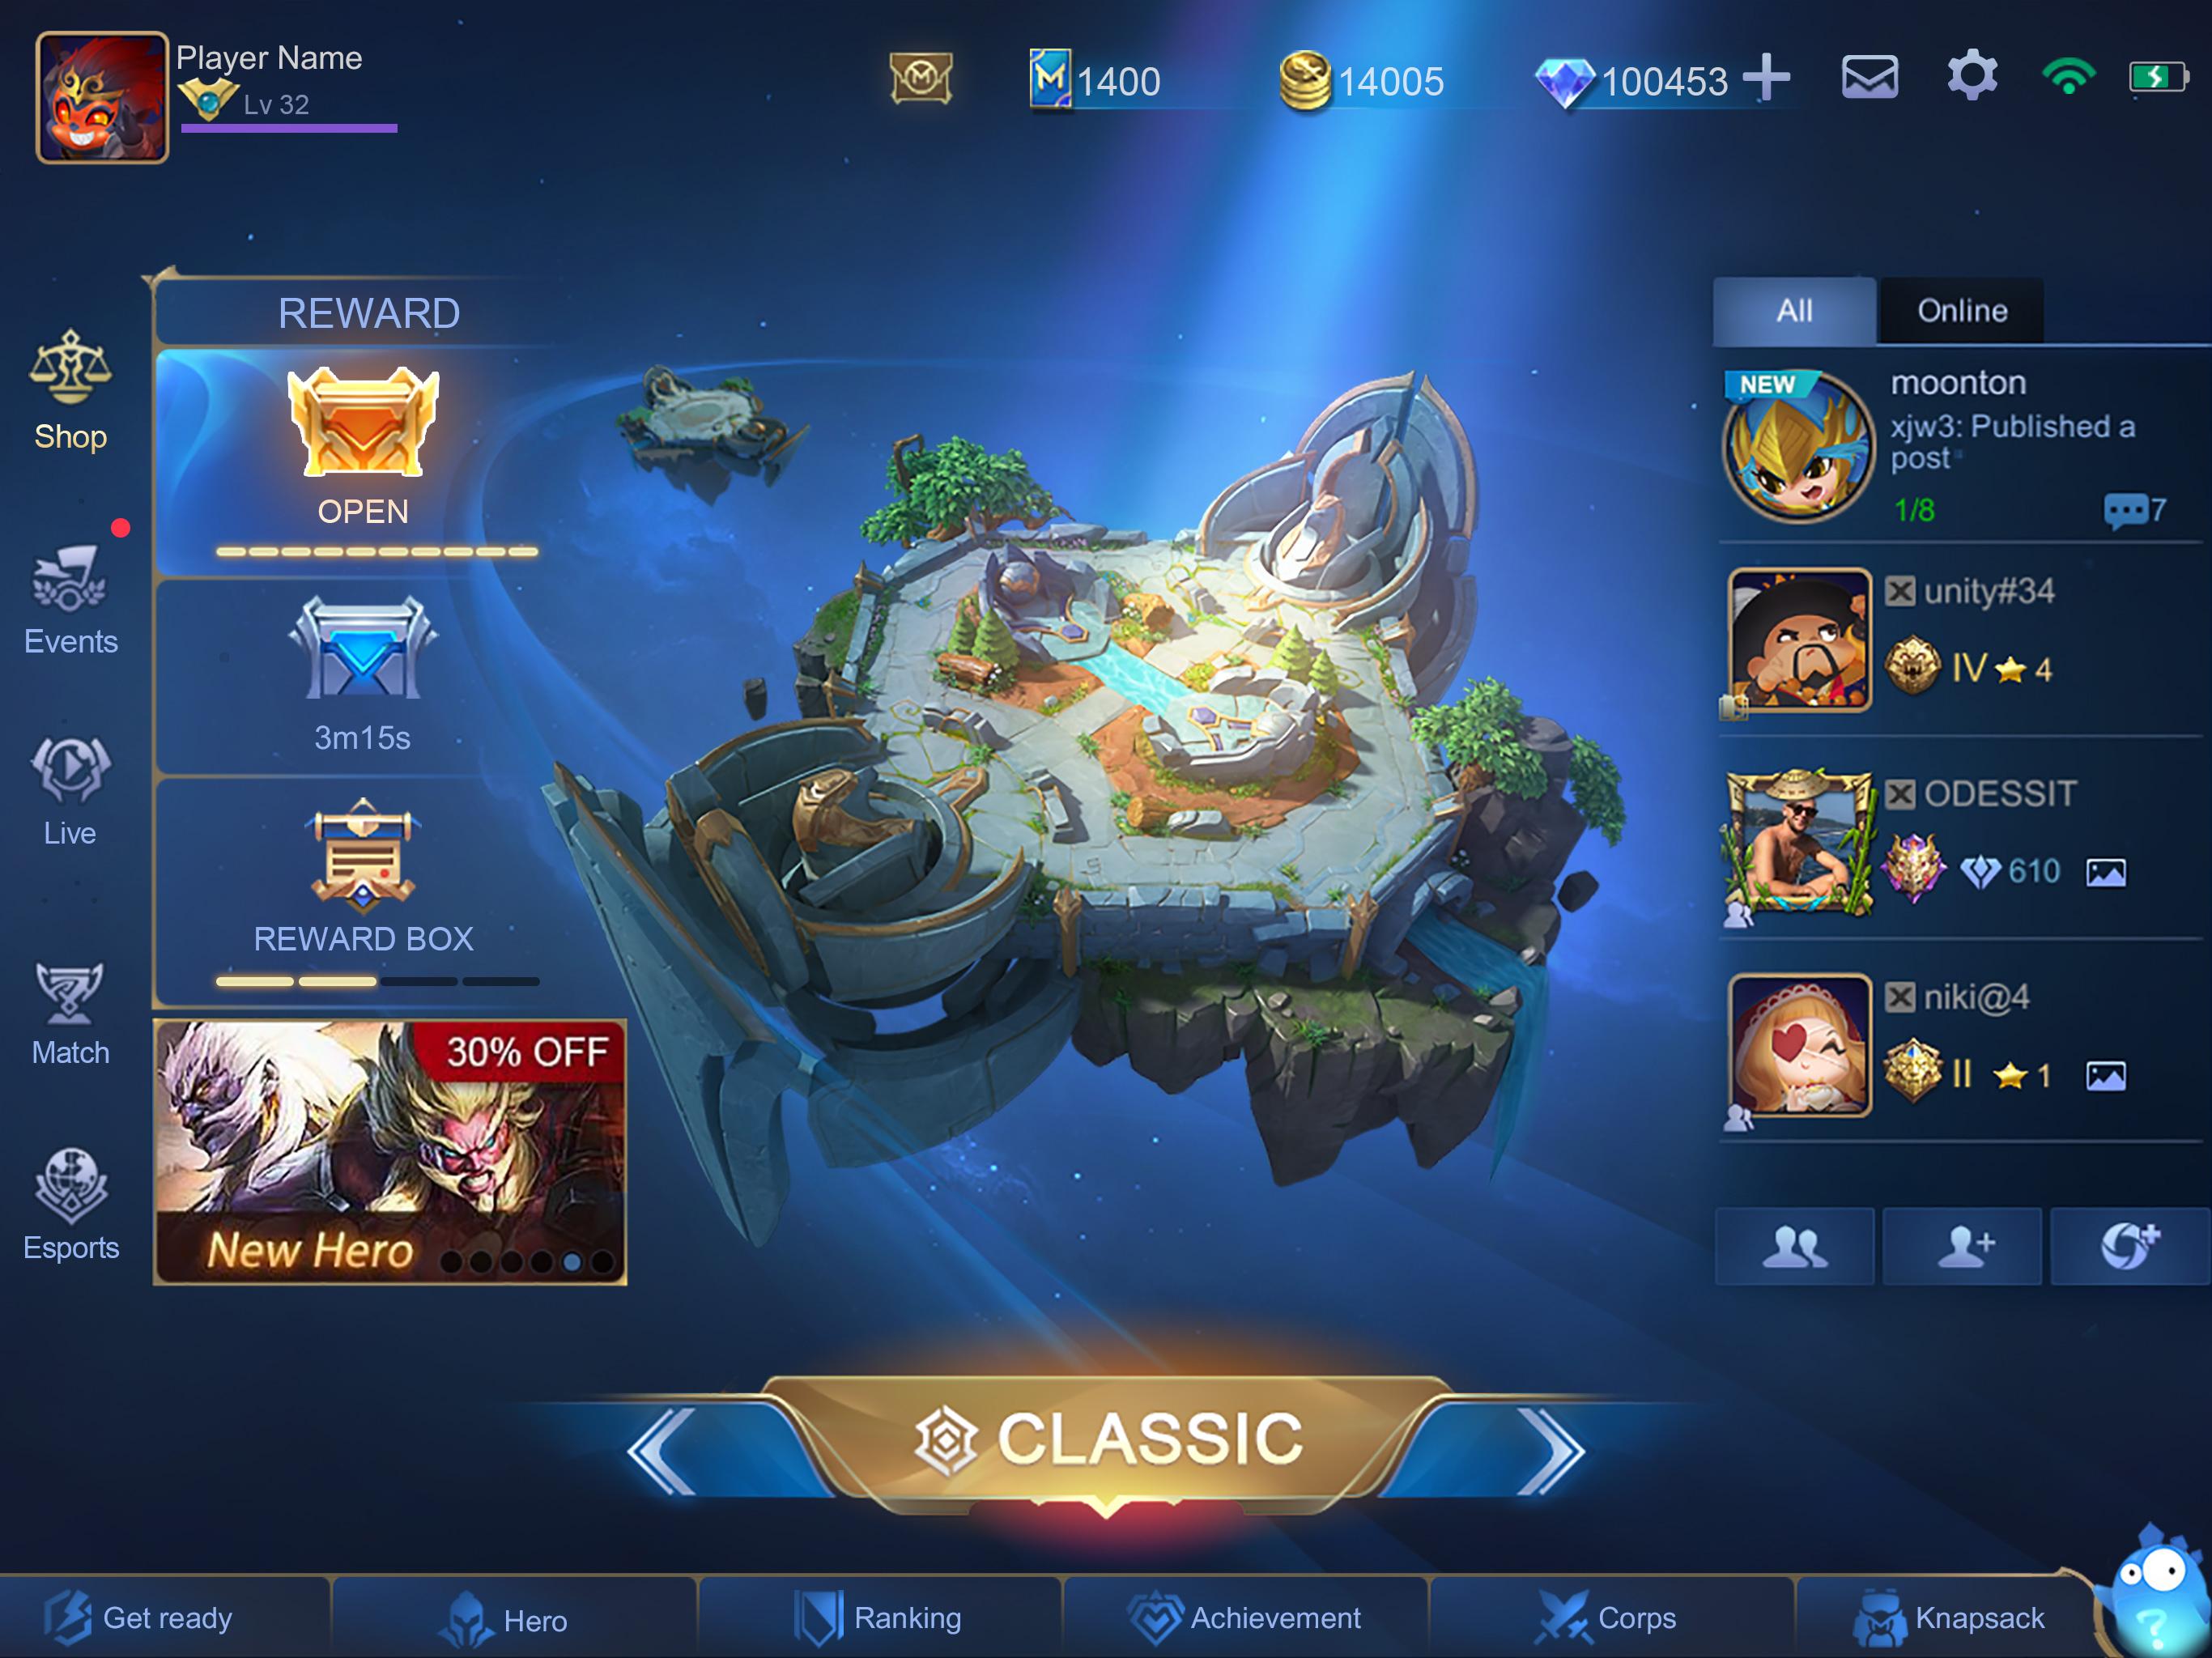 Mobile Legends: Bang bang APK Download - Free Action GAME for Android